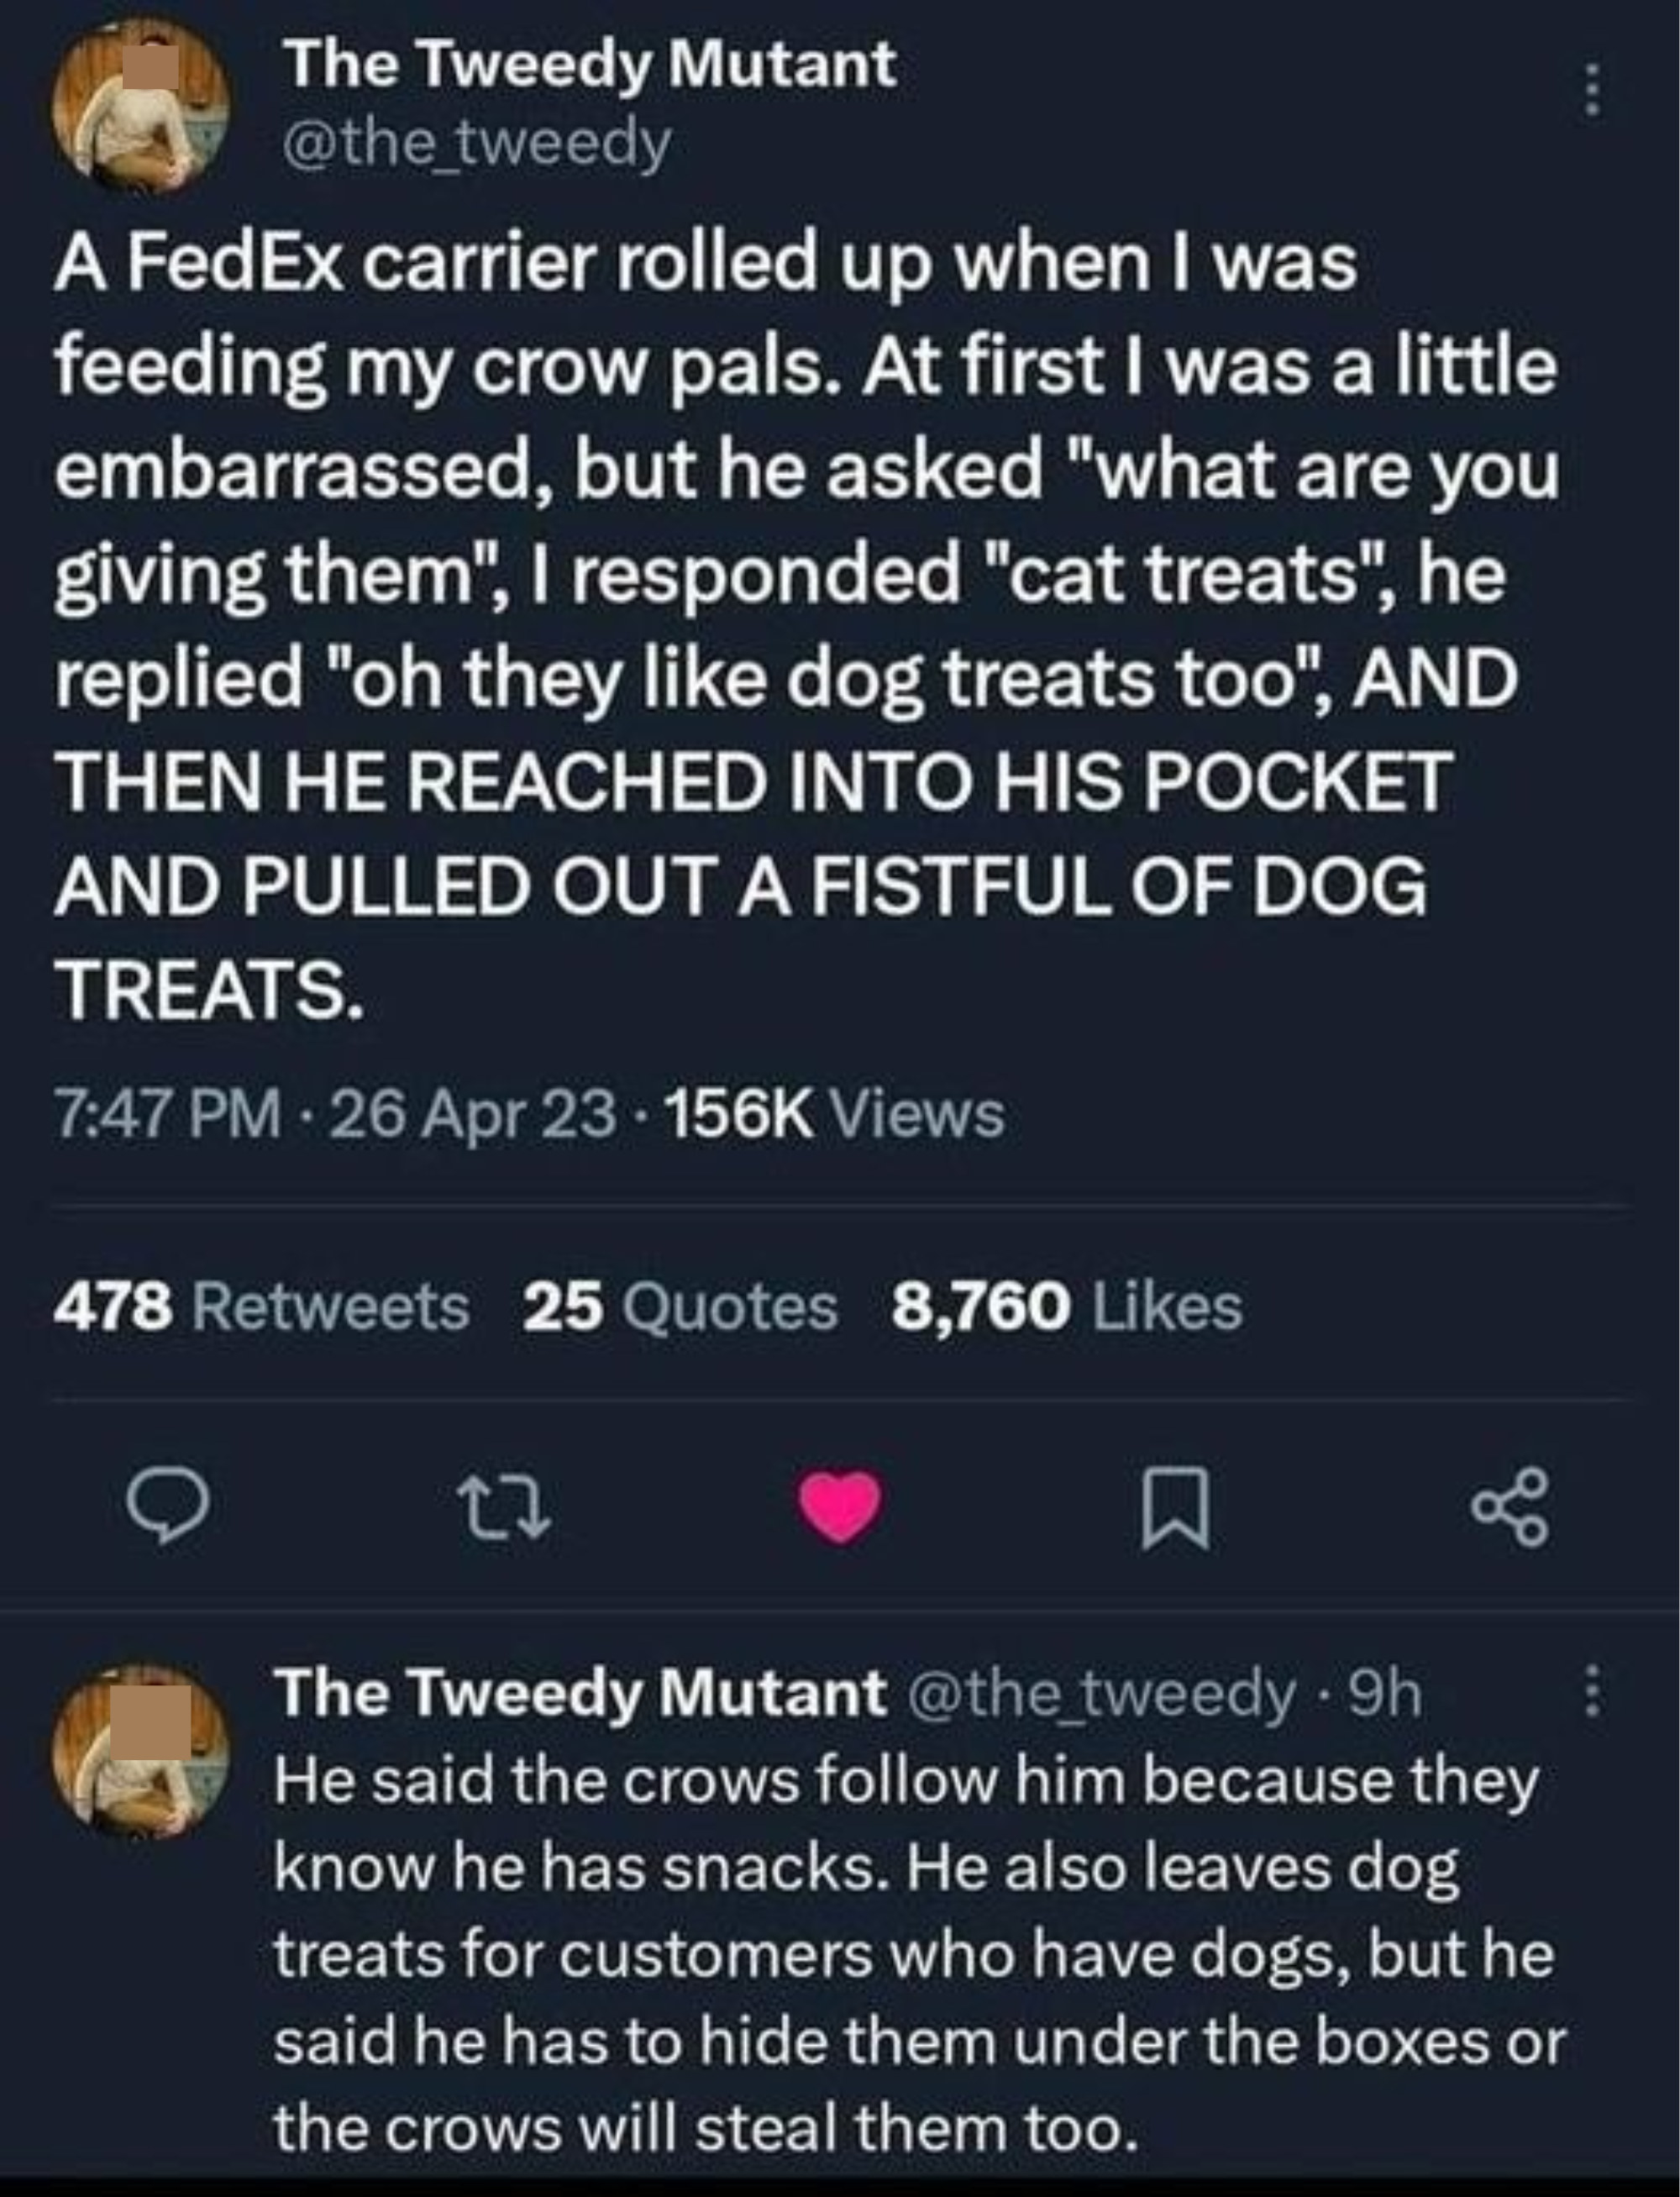 Person who was embarrassed to be seen by FedEx carrier feeding crows cat treats finds out the carrier also feeds them — but they feed the crows dog treats (and the crows follow him because they know he has snacks)